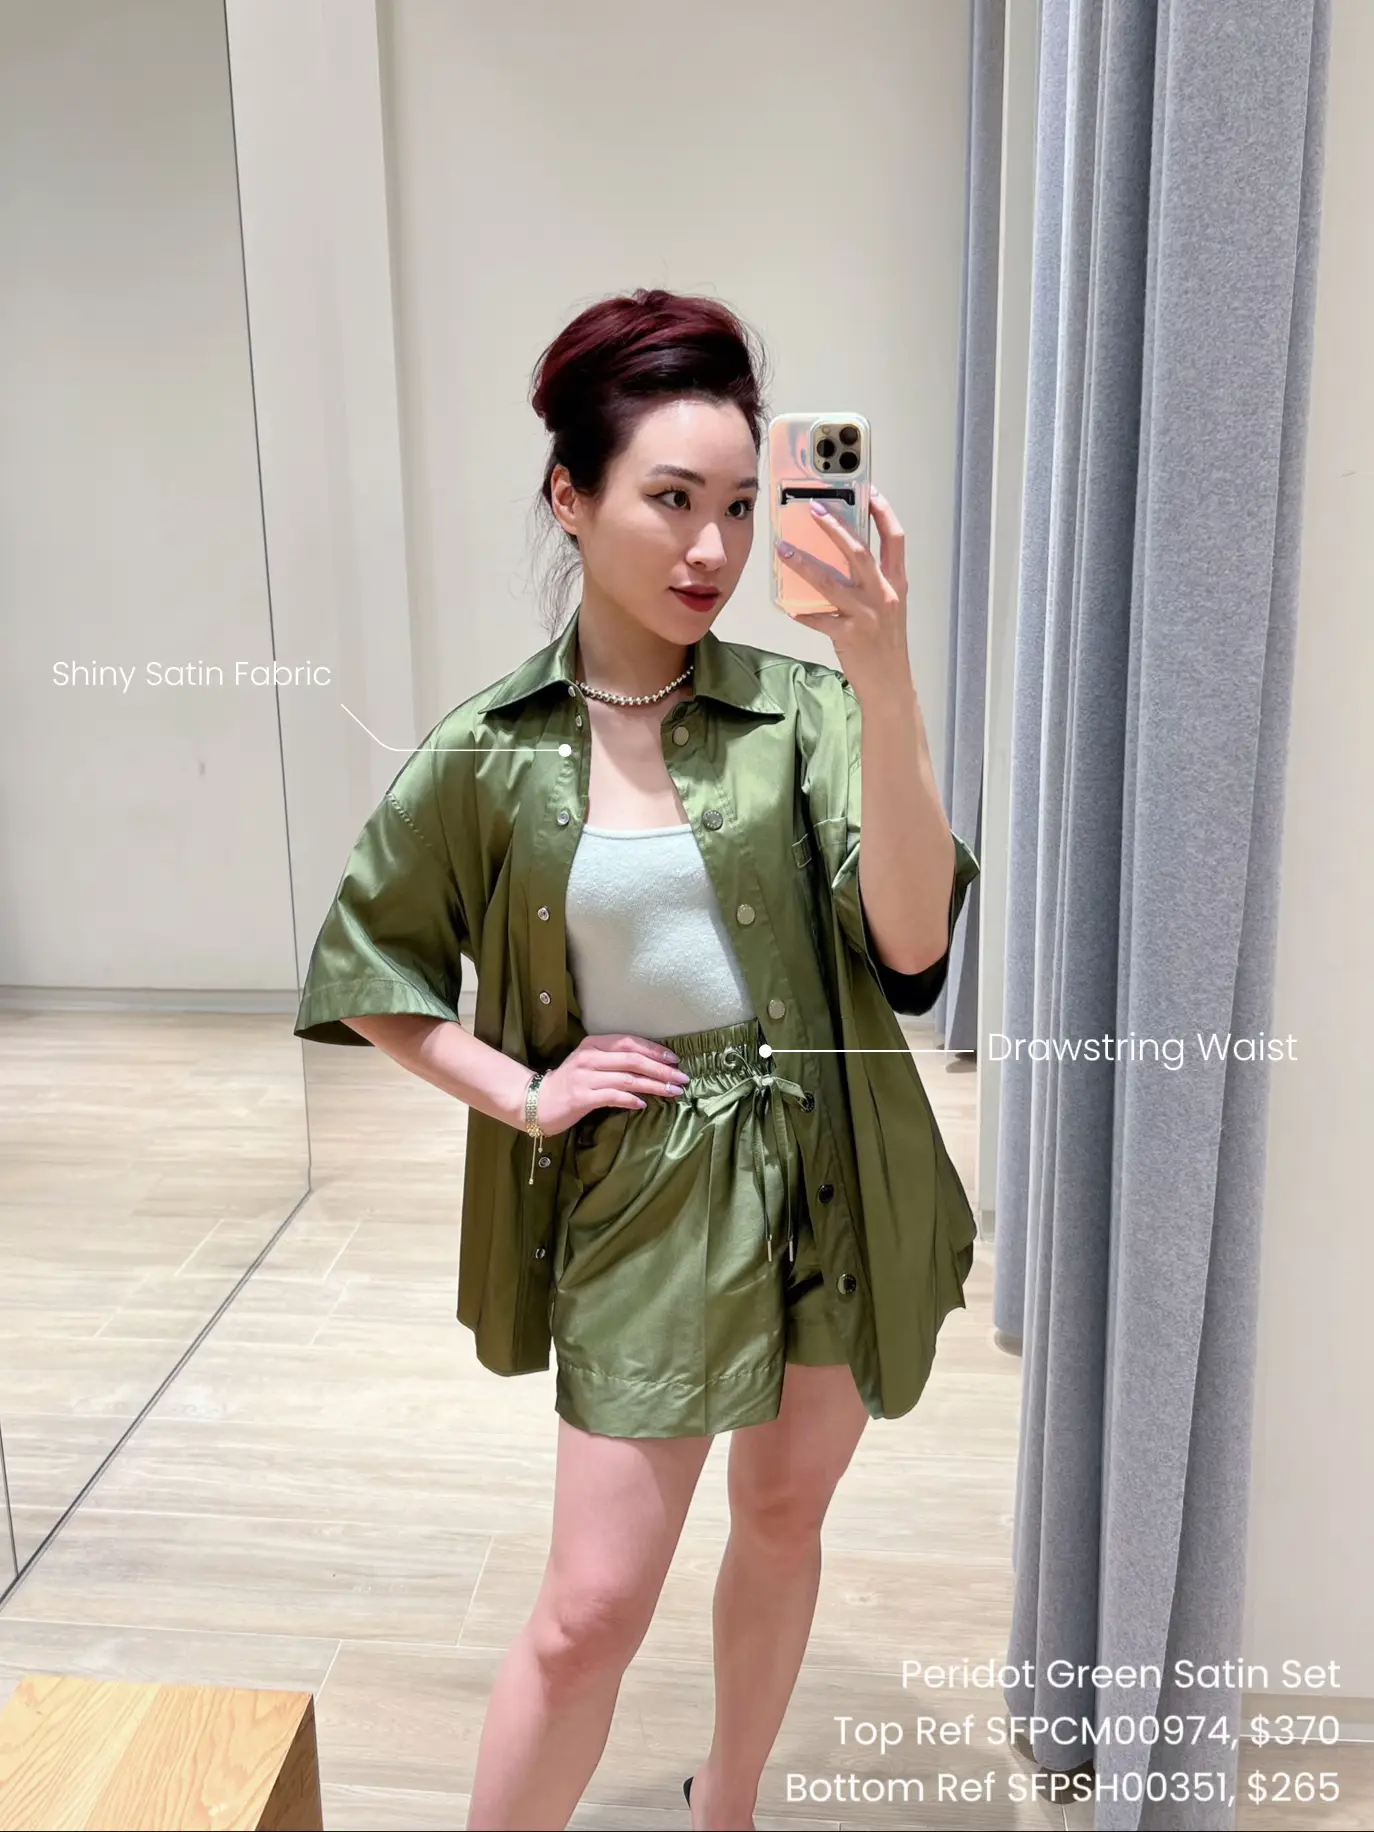 A/W 24/25 Key Color Trend for Women's Glossy Fabric – Topfashion